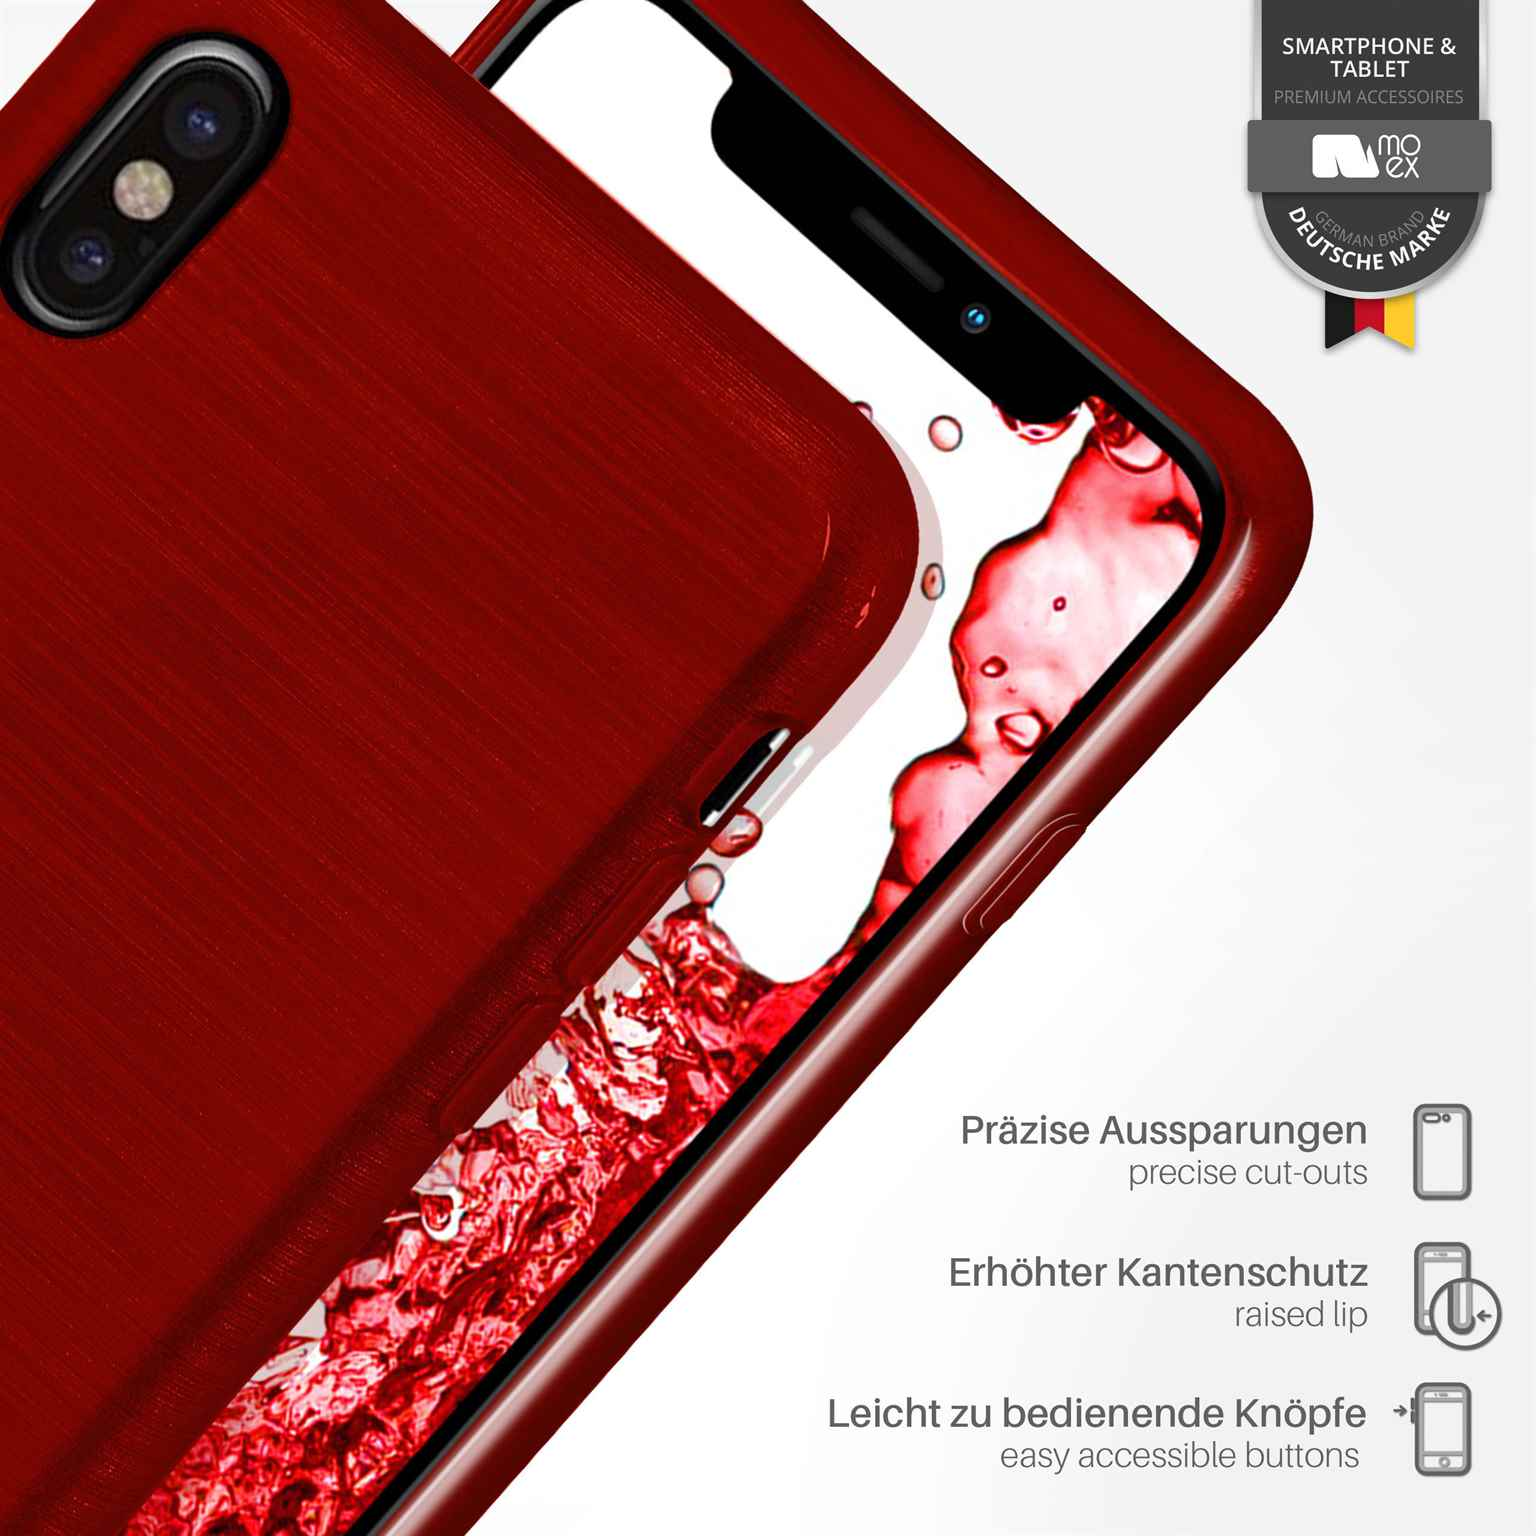 Case, Backcover, XS, iPhone Brushed MOEX Crimson-Red Apple,